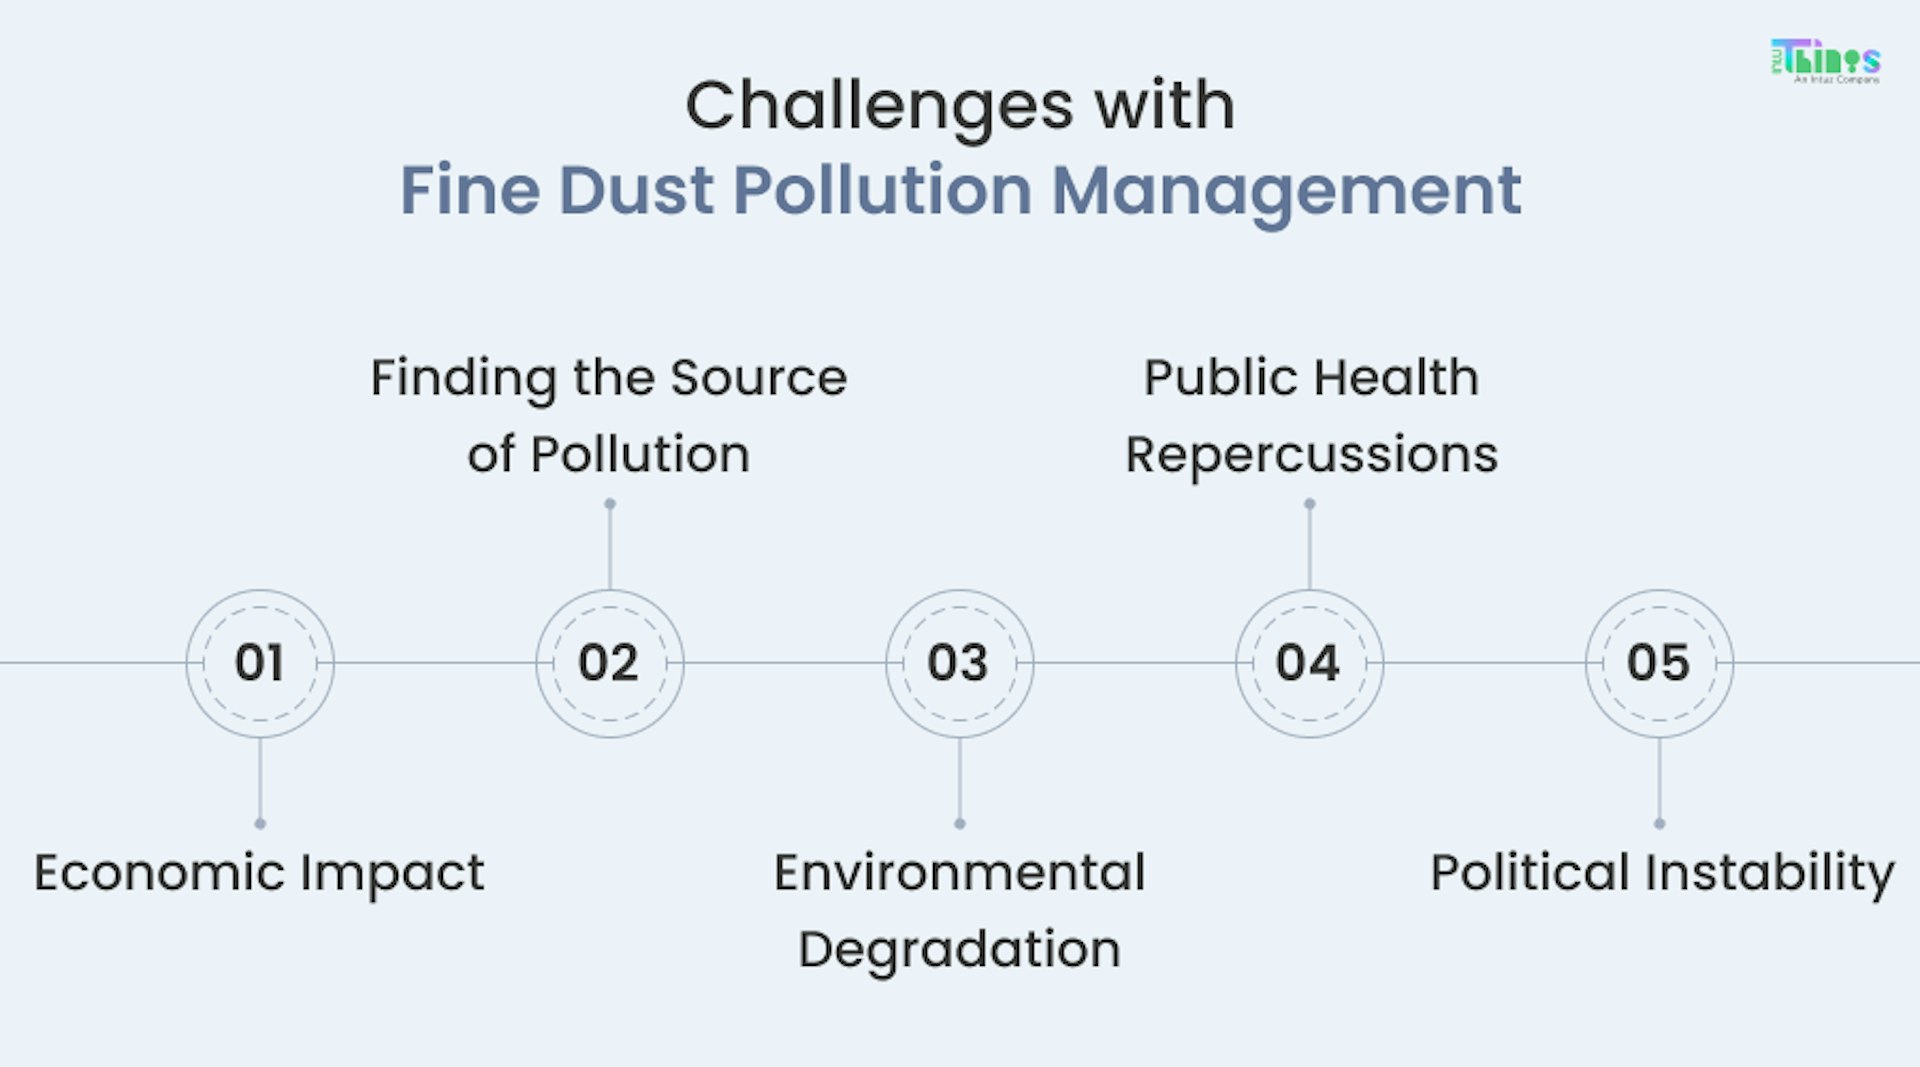 Challenges with Fine Dust Pollution Management